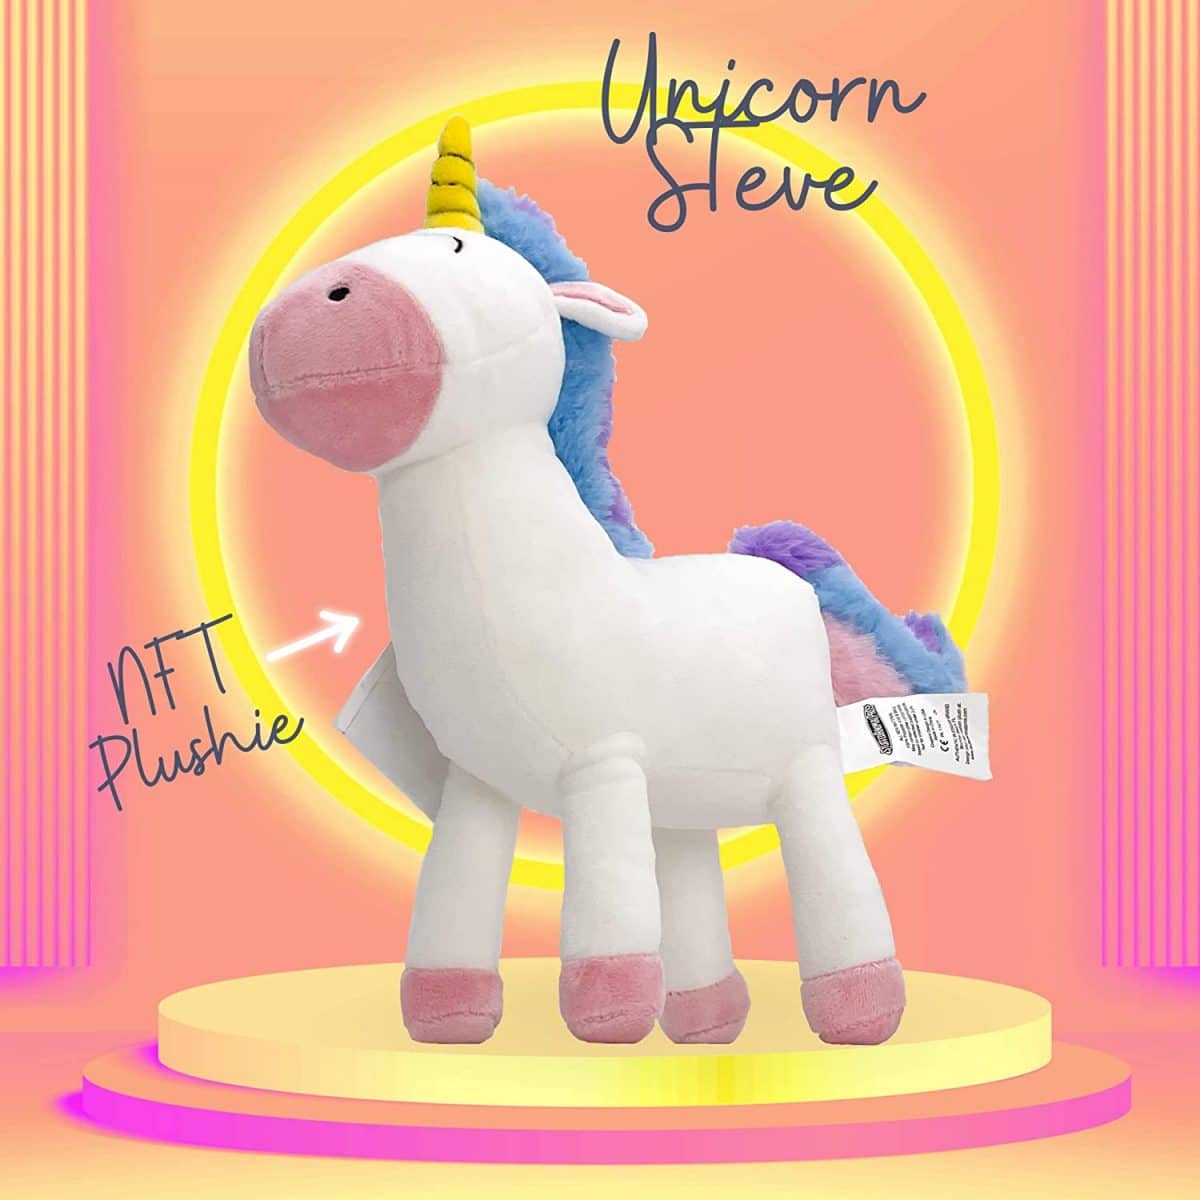 image of the Unicorn Steve plush toy NFT created by Budsies